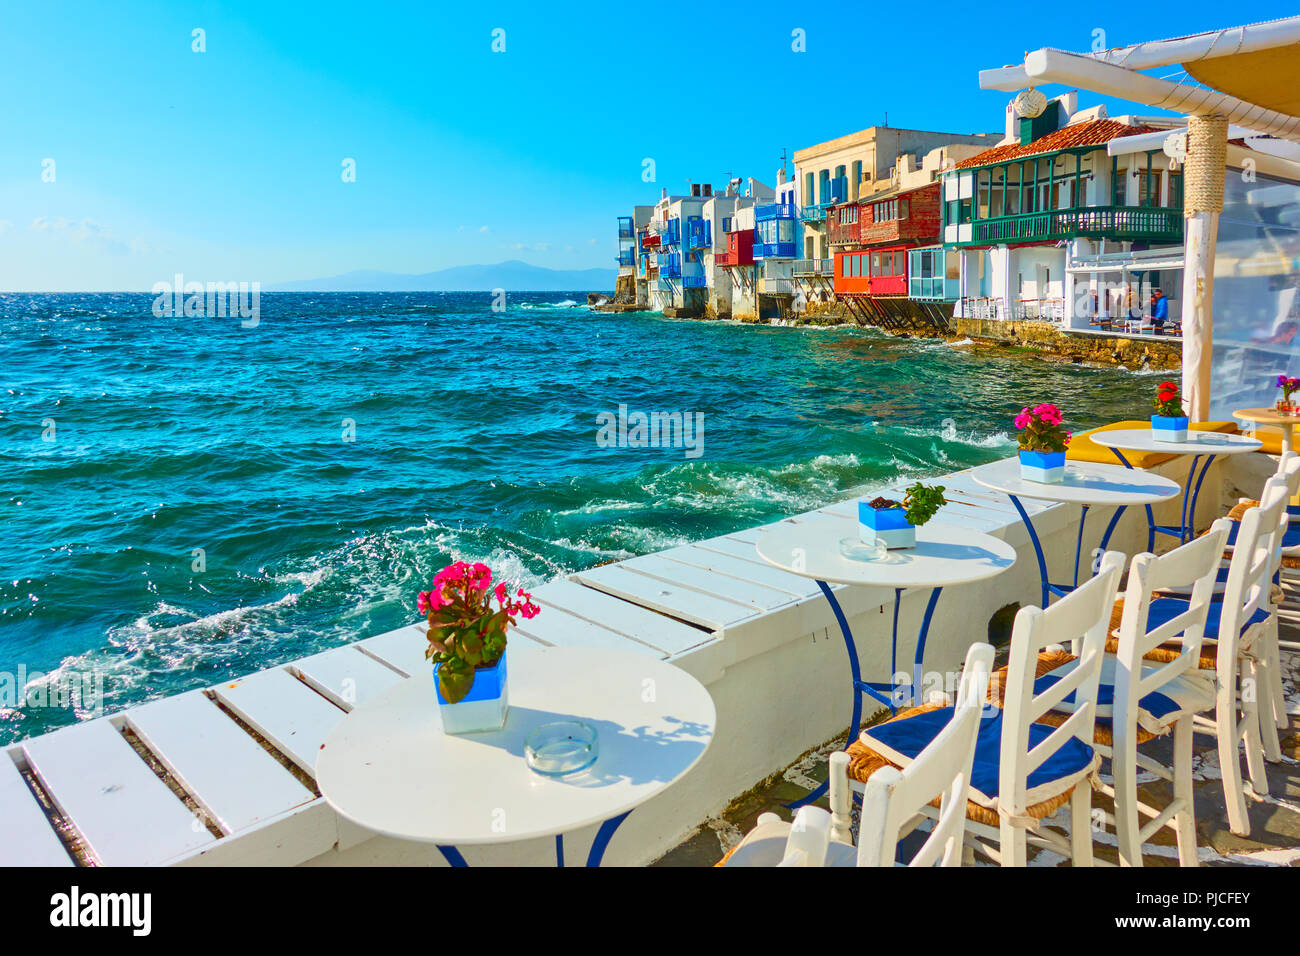 Small cafe by the sea next to The Little Venice district in Mykonos Island, Greece Stock Photo